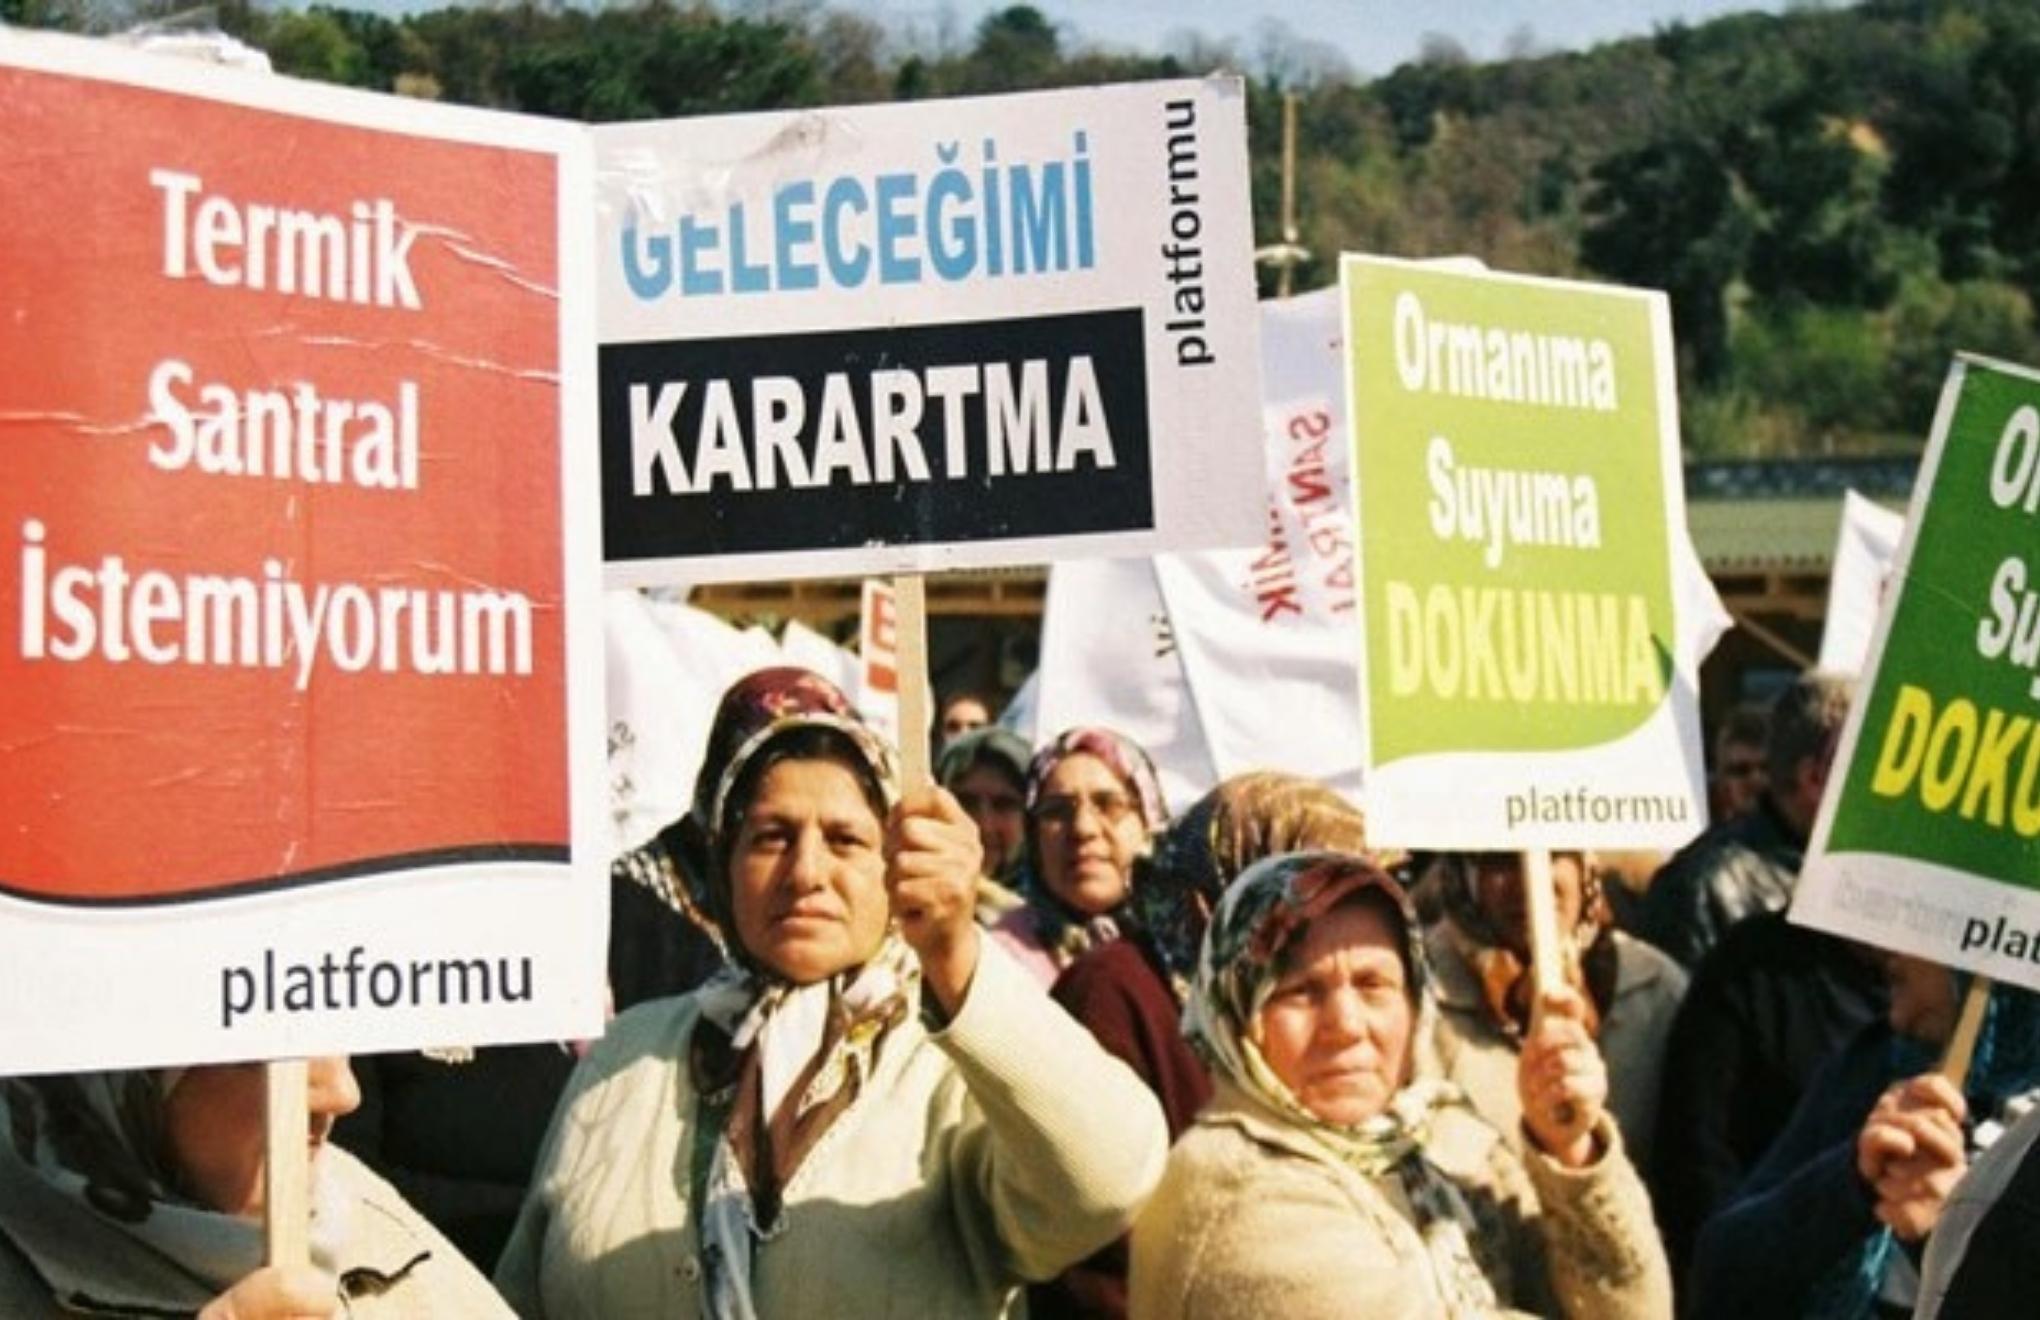 Bartın coal-fired plant project canceled after 16 years of legal struggle